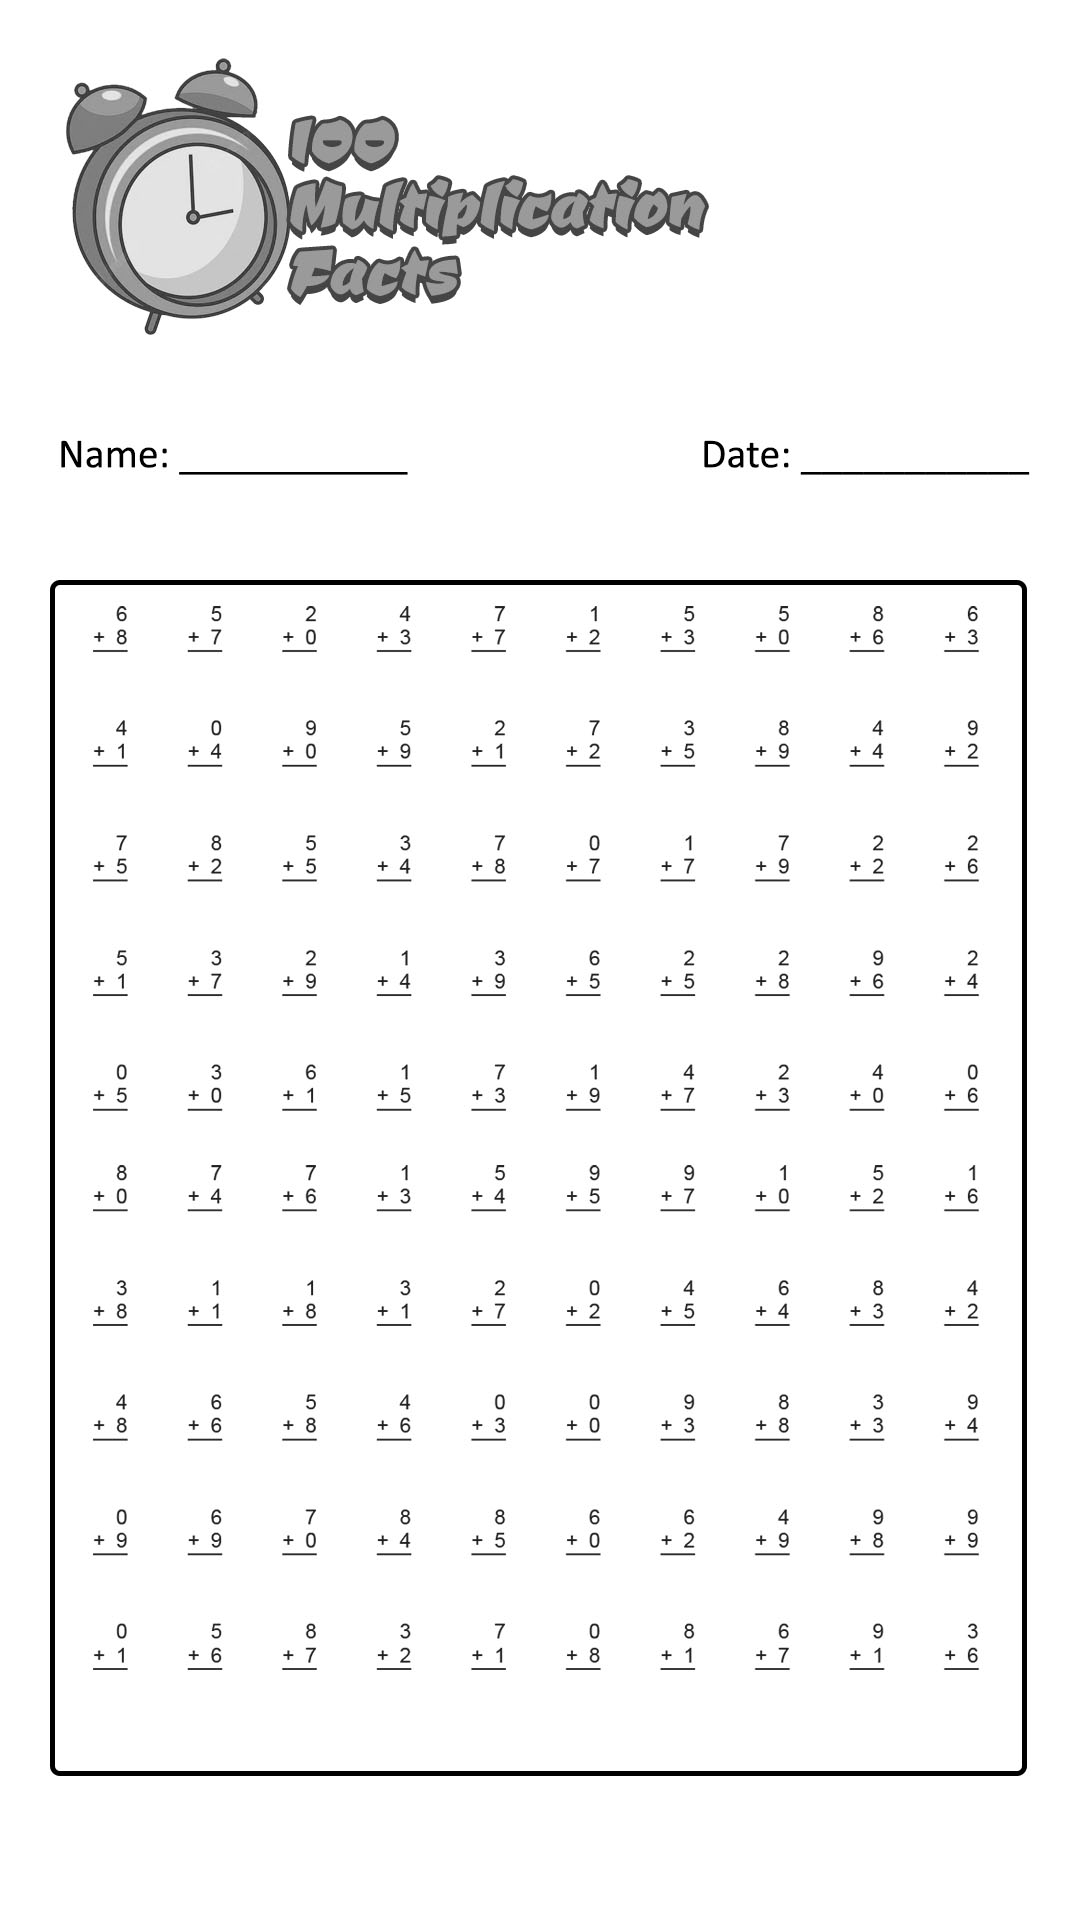 4th-grade-multiplication-worksheets-100-problems-free-printable